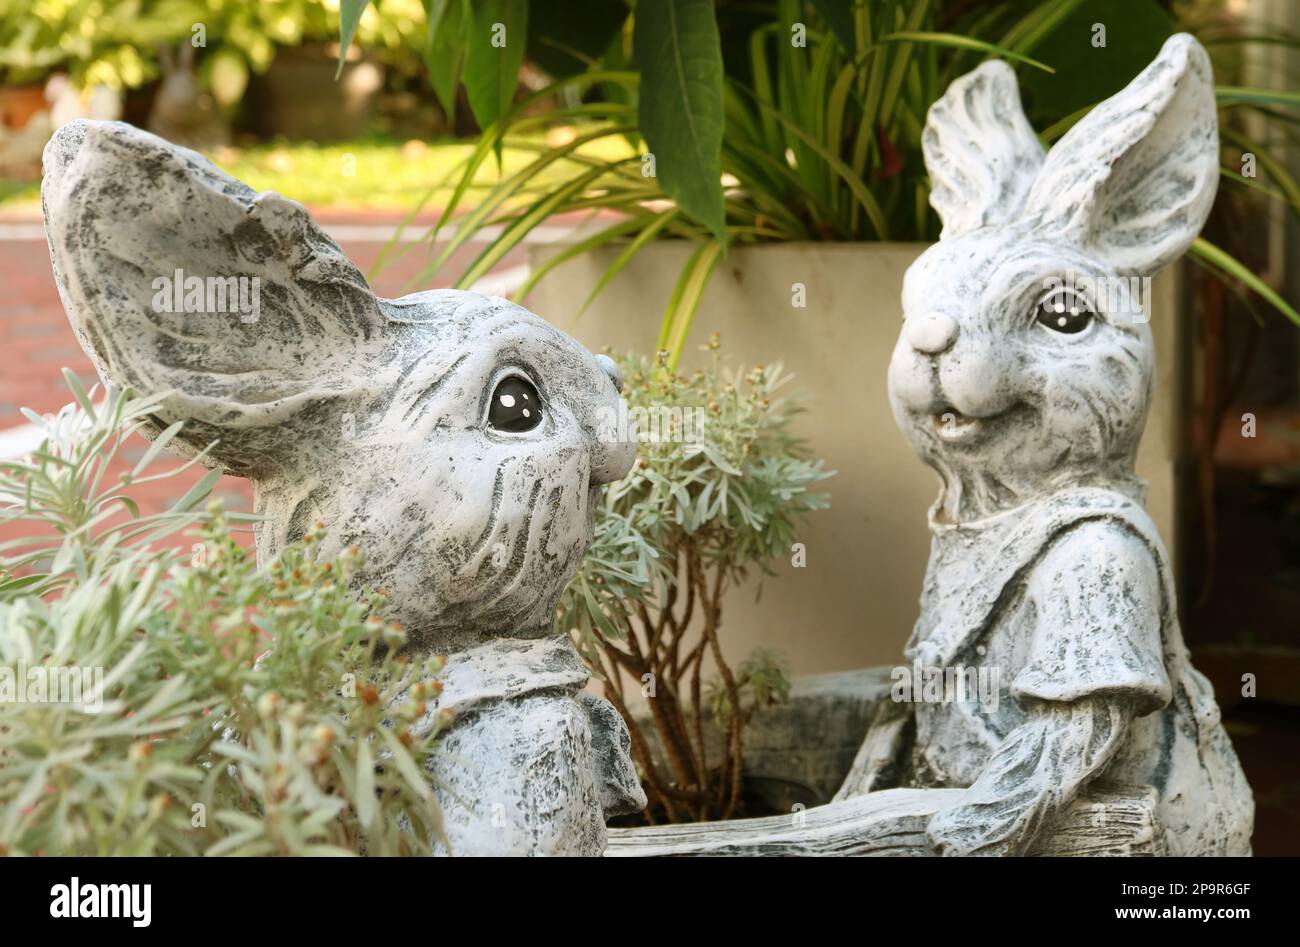 Pair of Adorable Easter Bunny Sculptures at the Yard Stock Photo